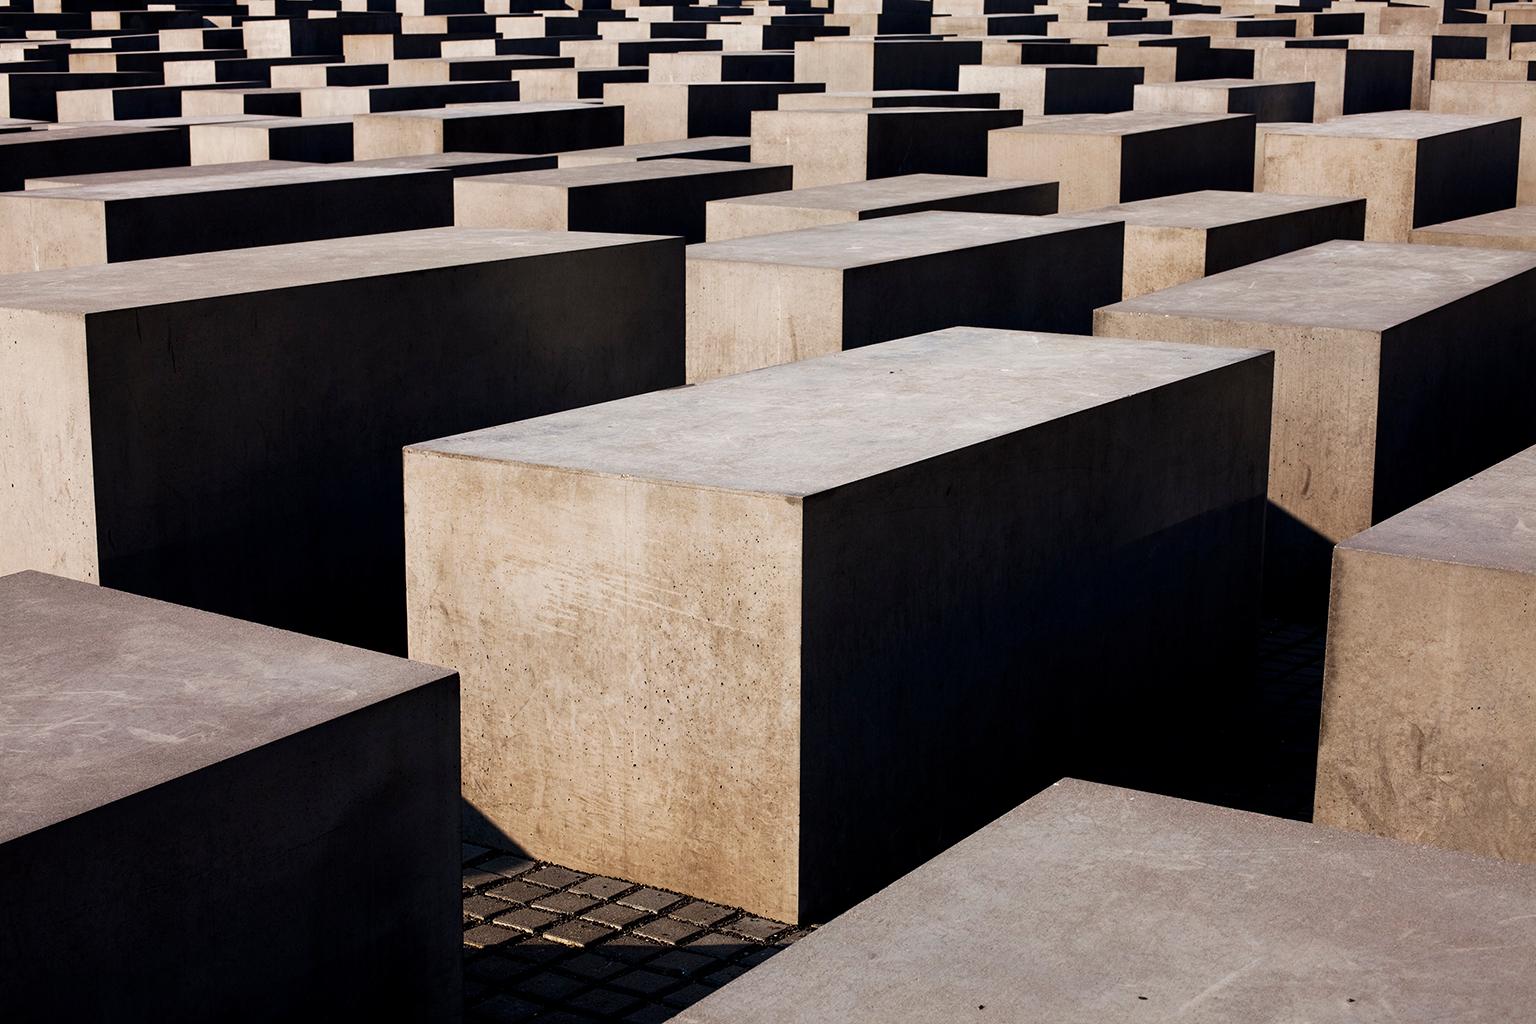 monument to the murdered jews of europe